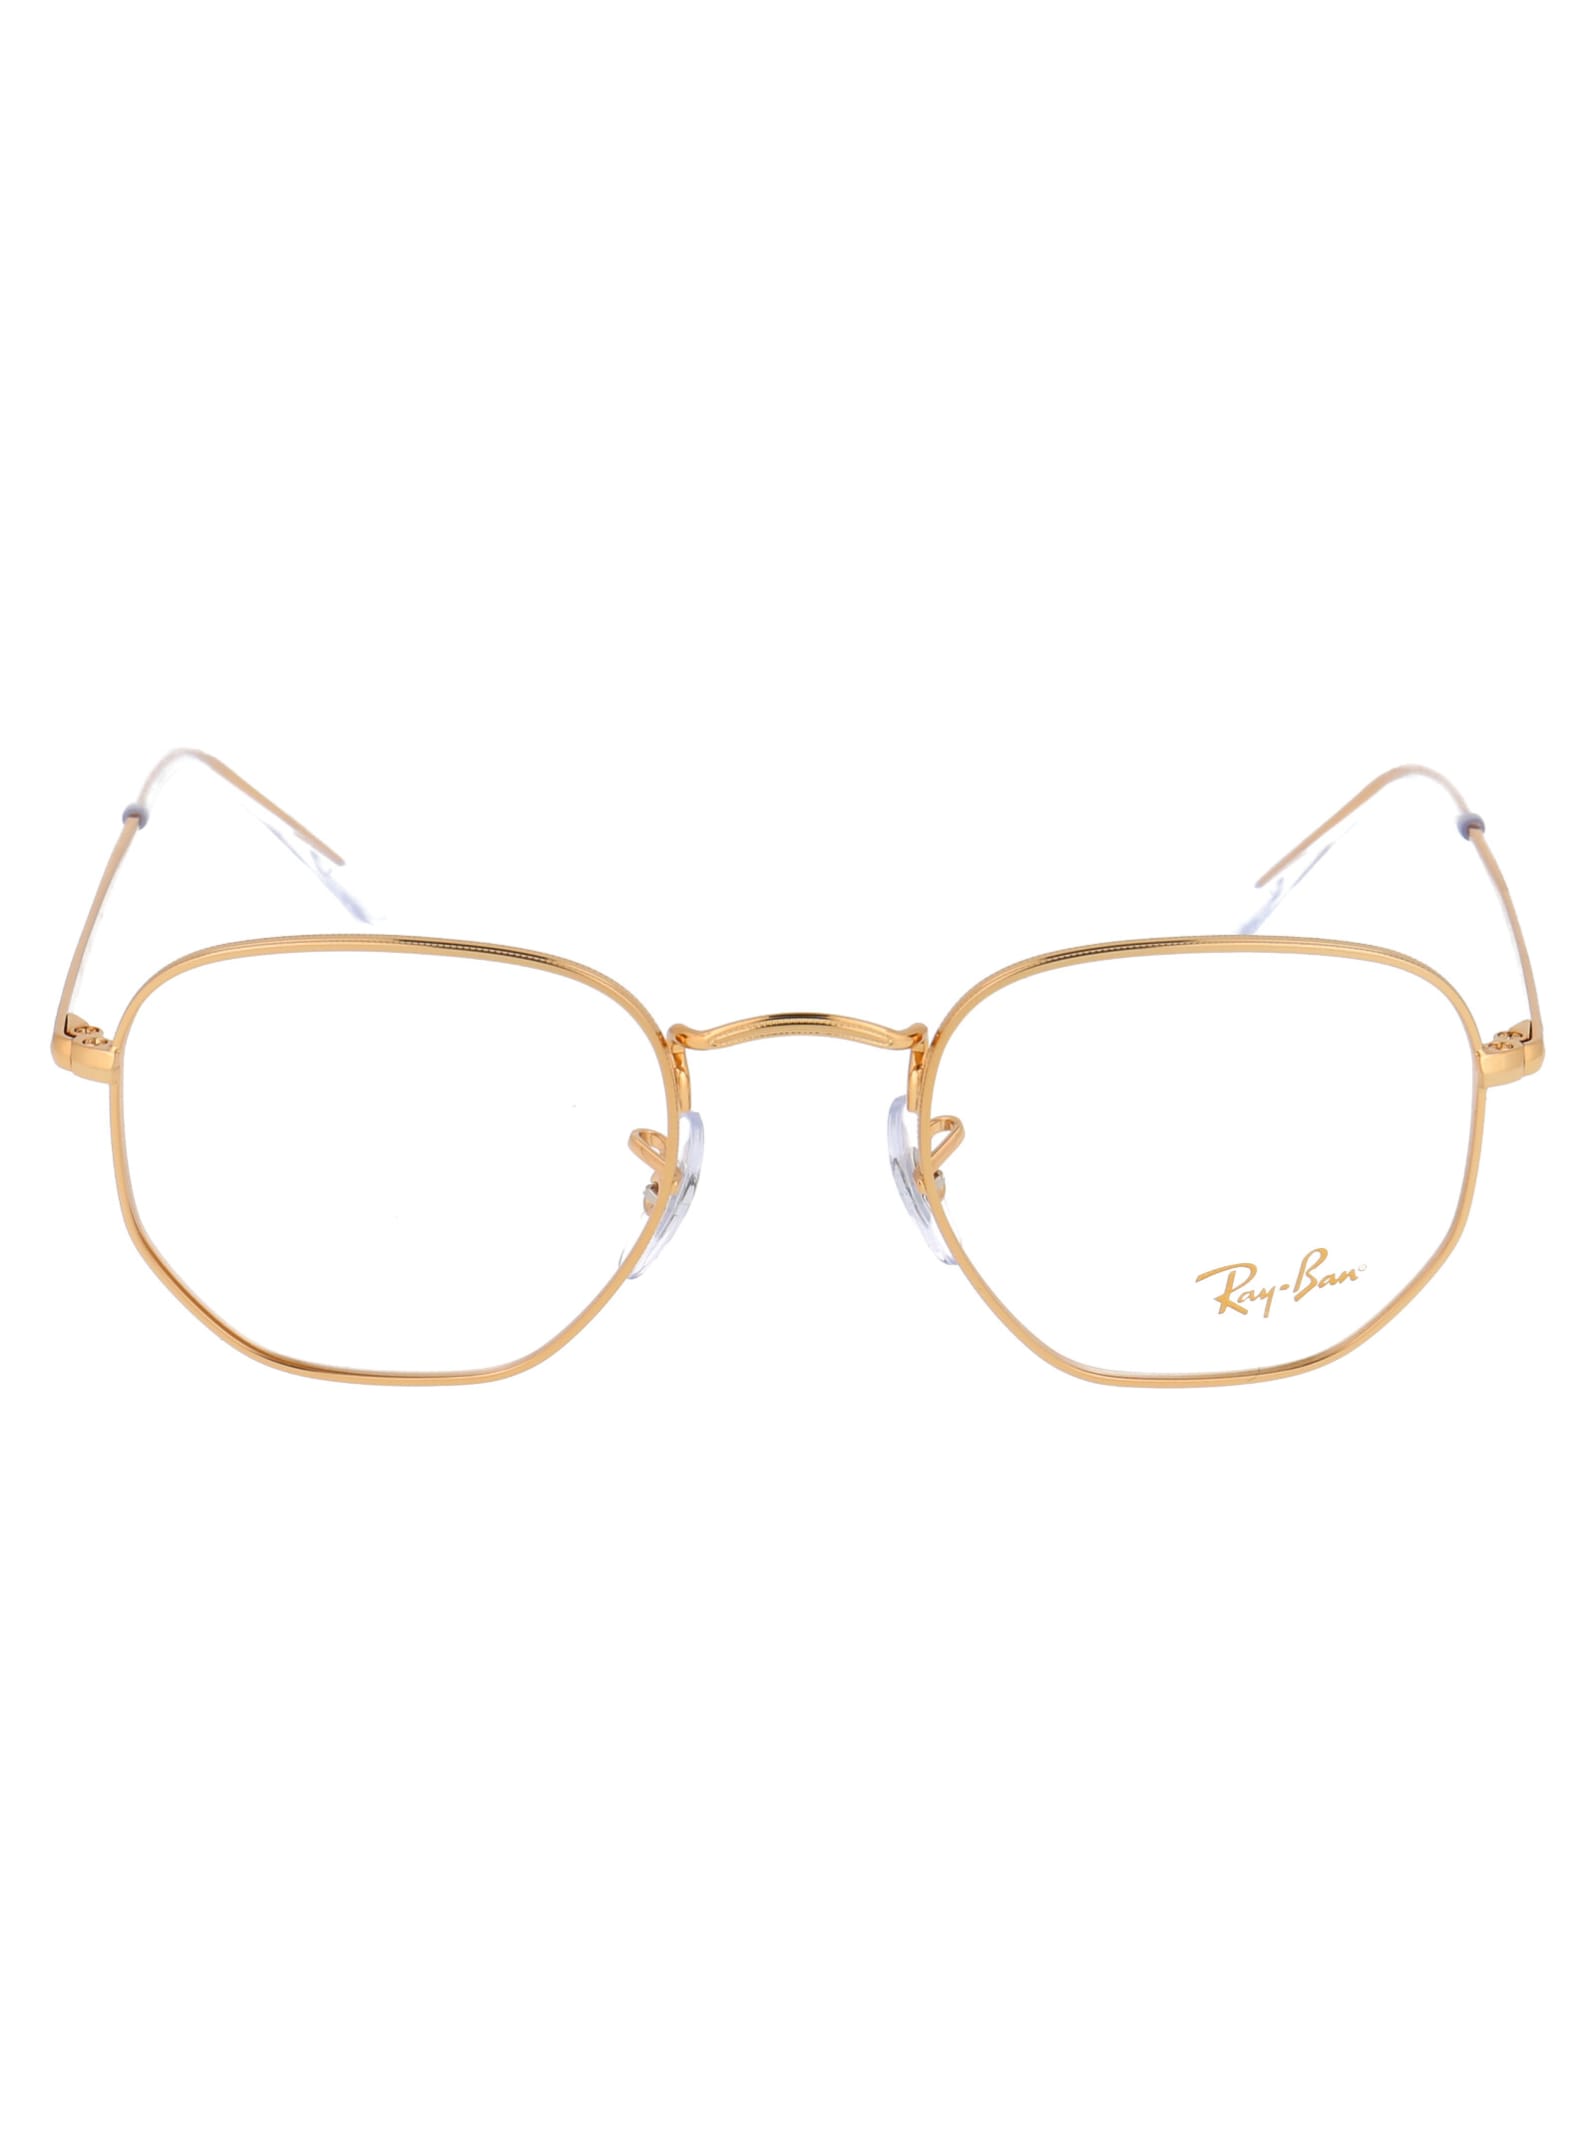 Ray Ban 0rx6448 Glasses In 3086 Legend Gold